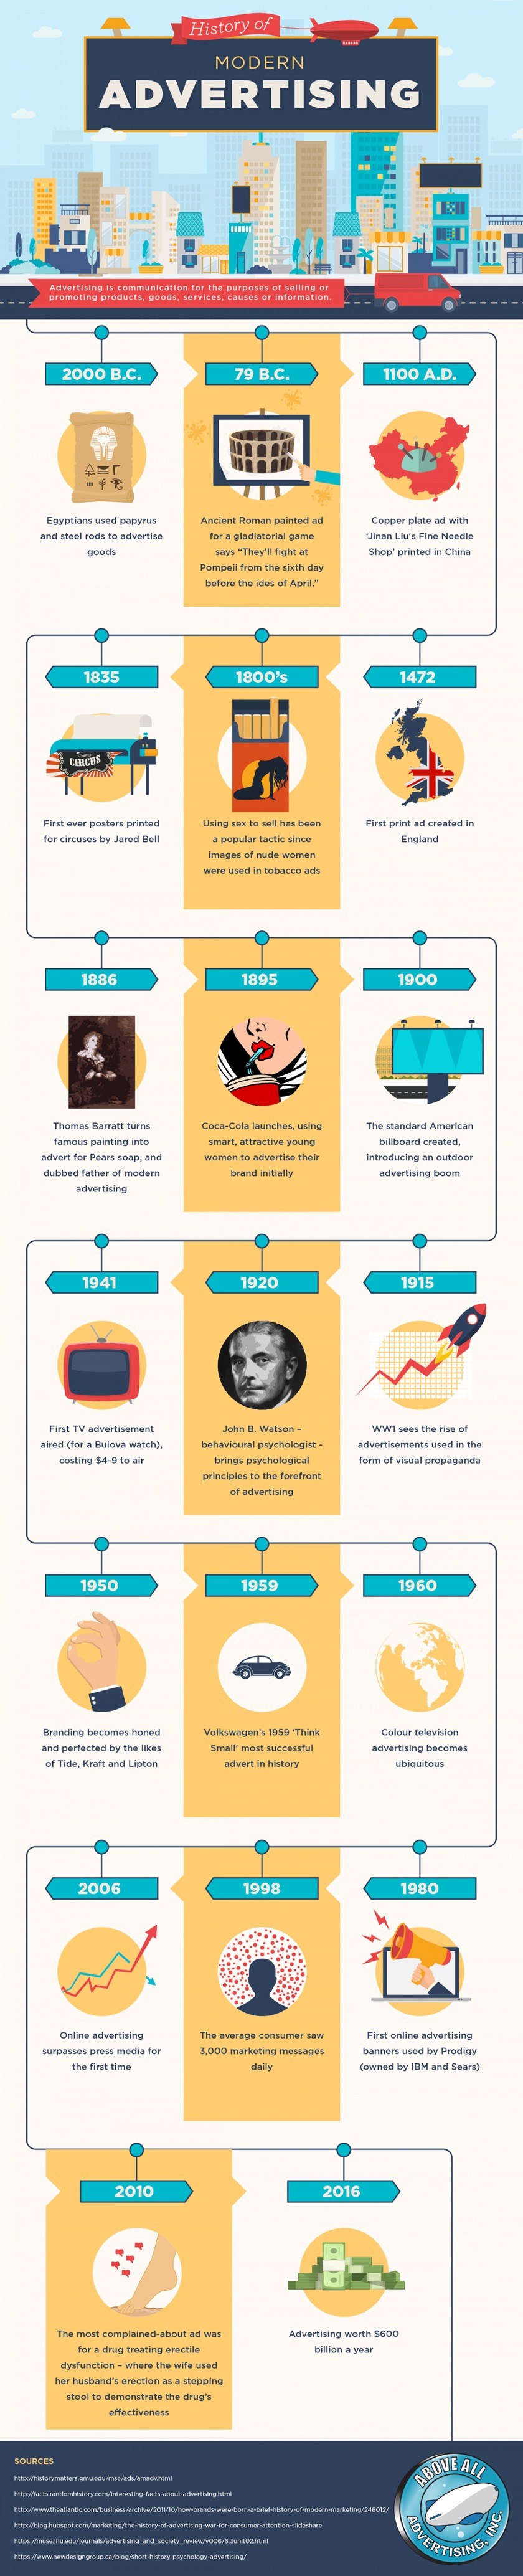 the history of advertising